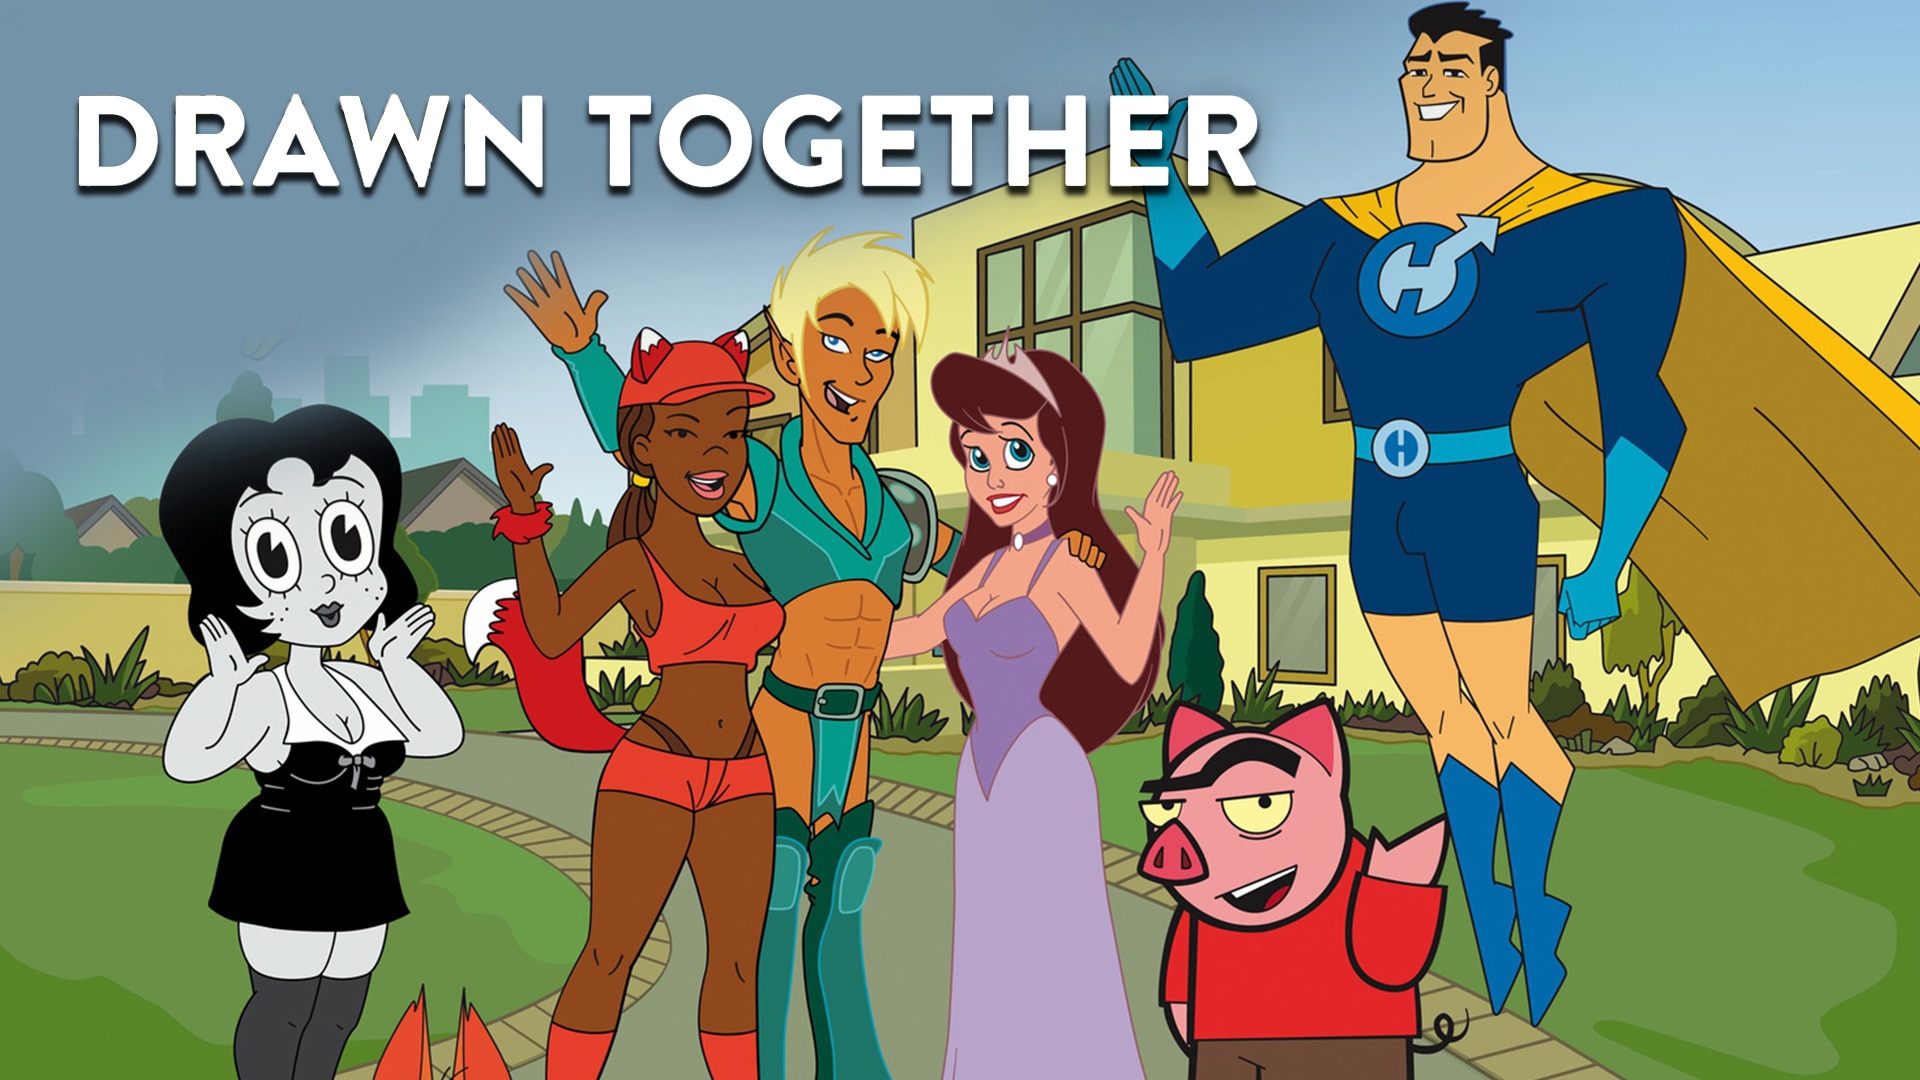 Drawn Together | Watch Comedy Series Drawn Together Full Episodes